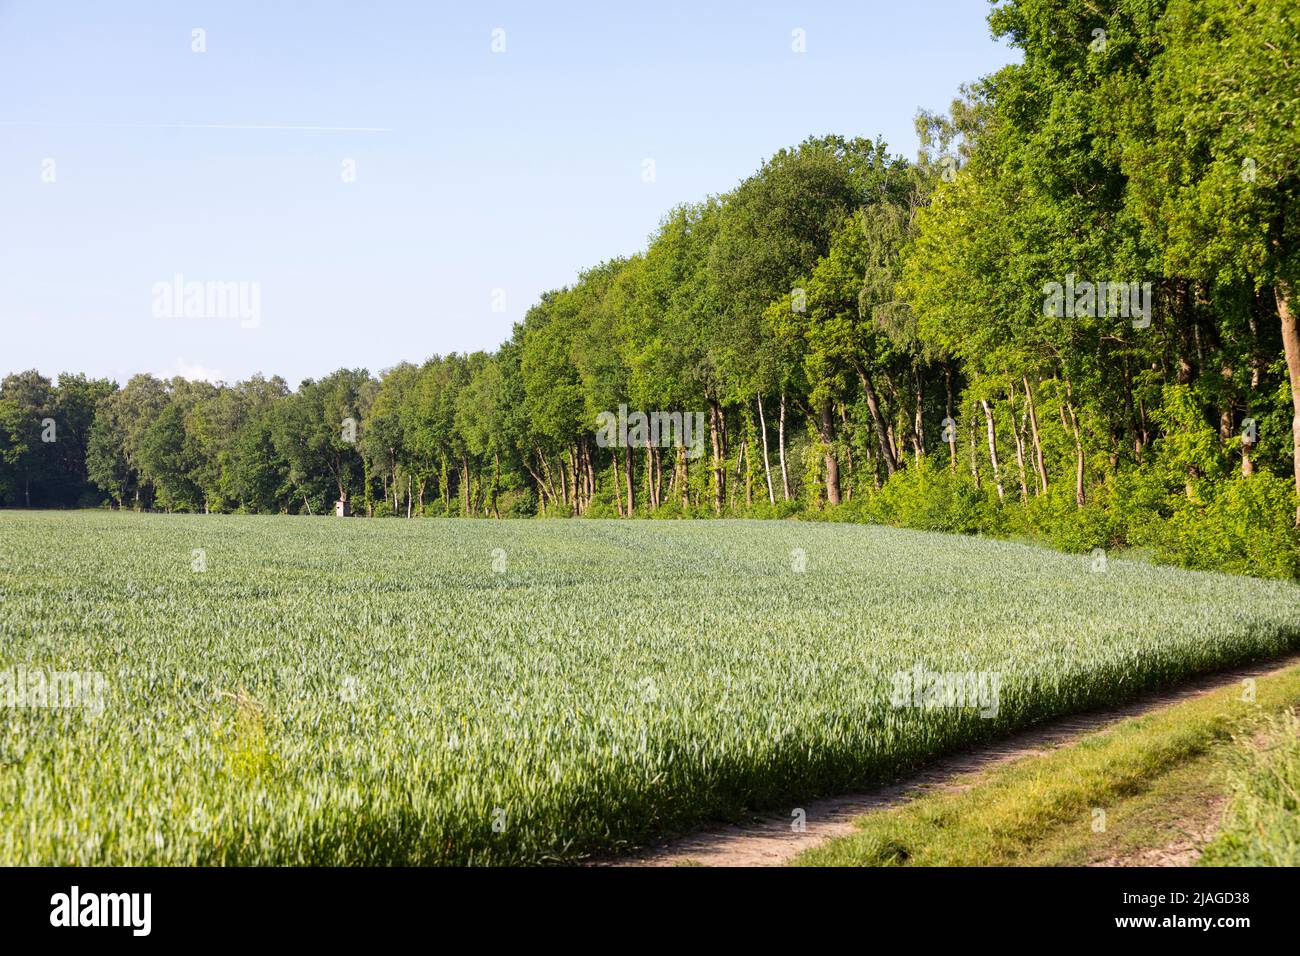 Field with young plants of corn in Northern Germany (Lower Saxony) Stock Photo